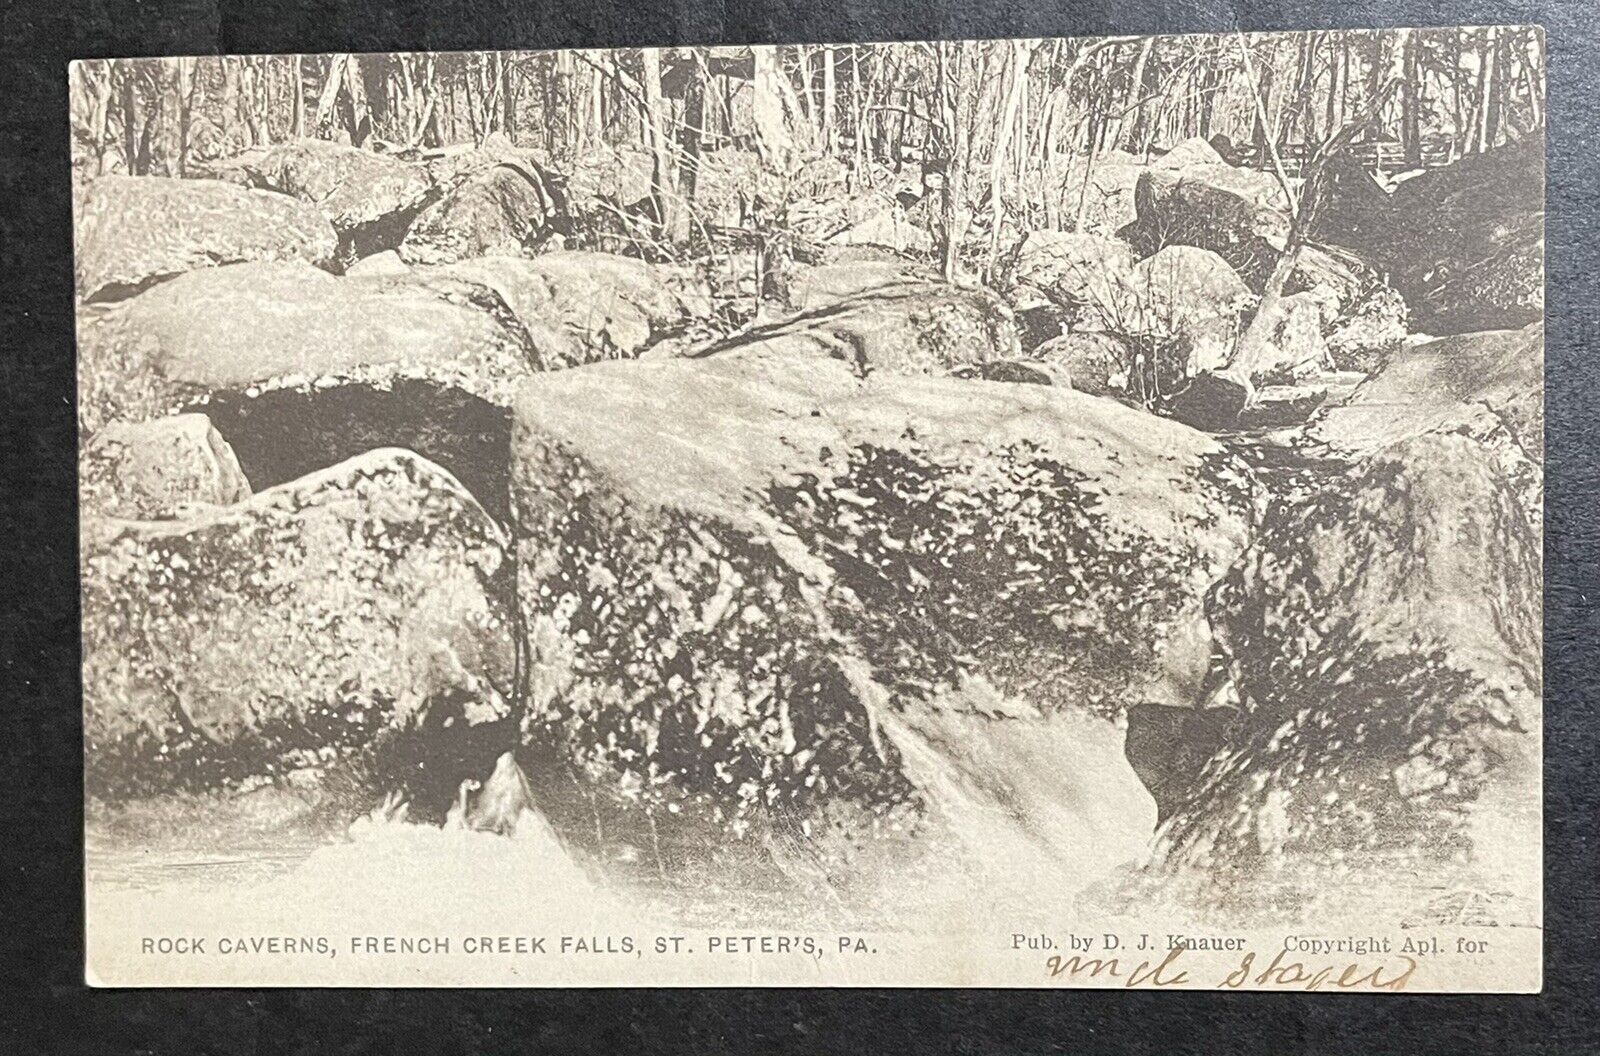 1906 ST Saint PETERS FRENCH CREEK FALLS ROCK CAVERNS CHESTER COUNTY PENNSYLVANIA